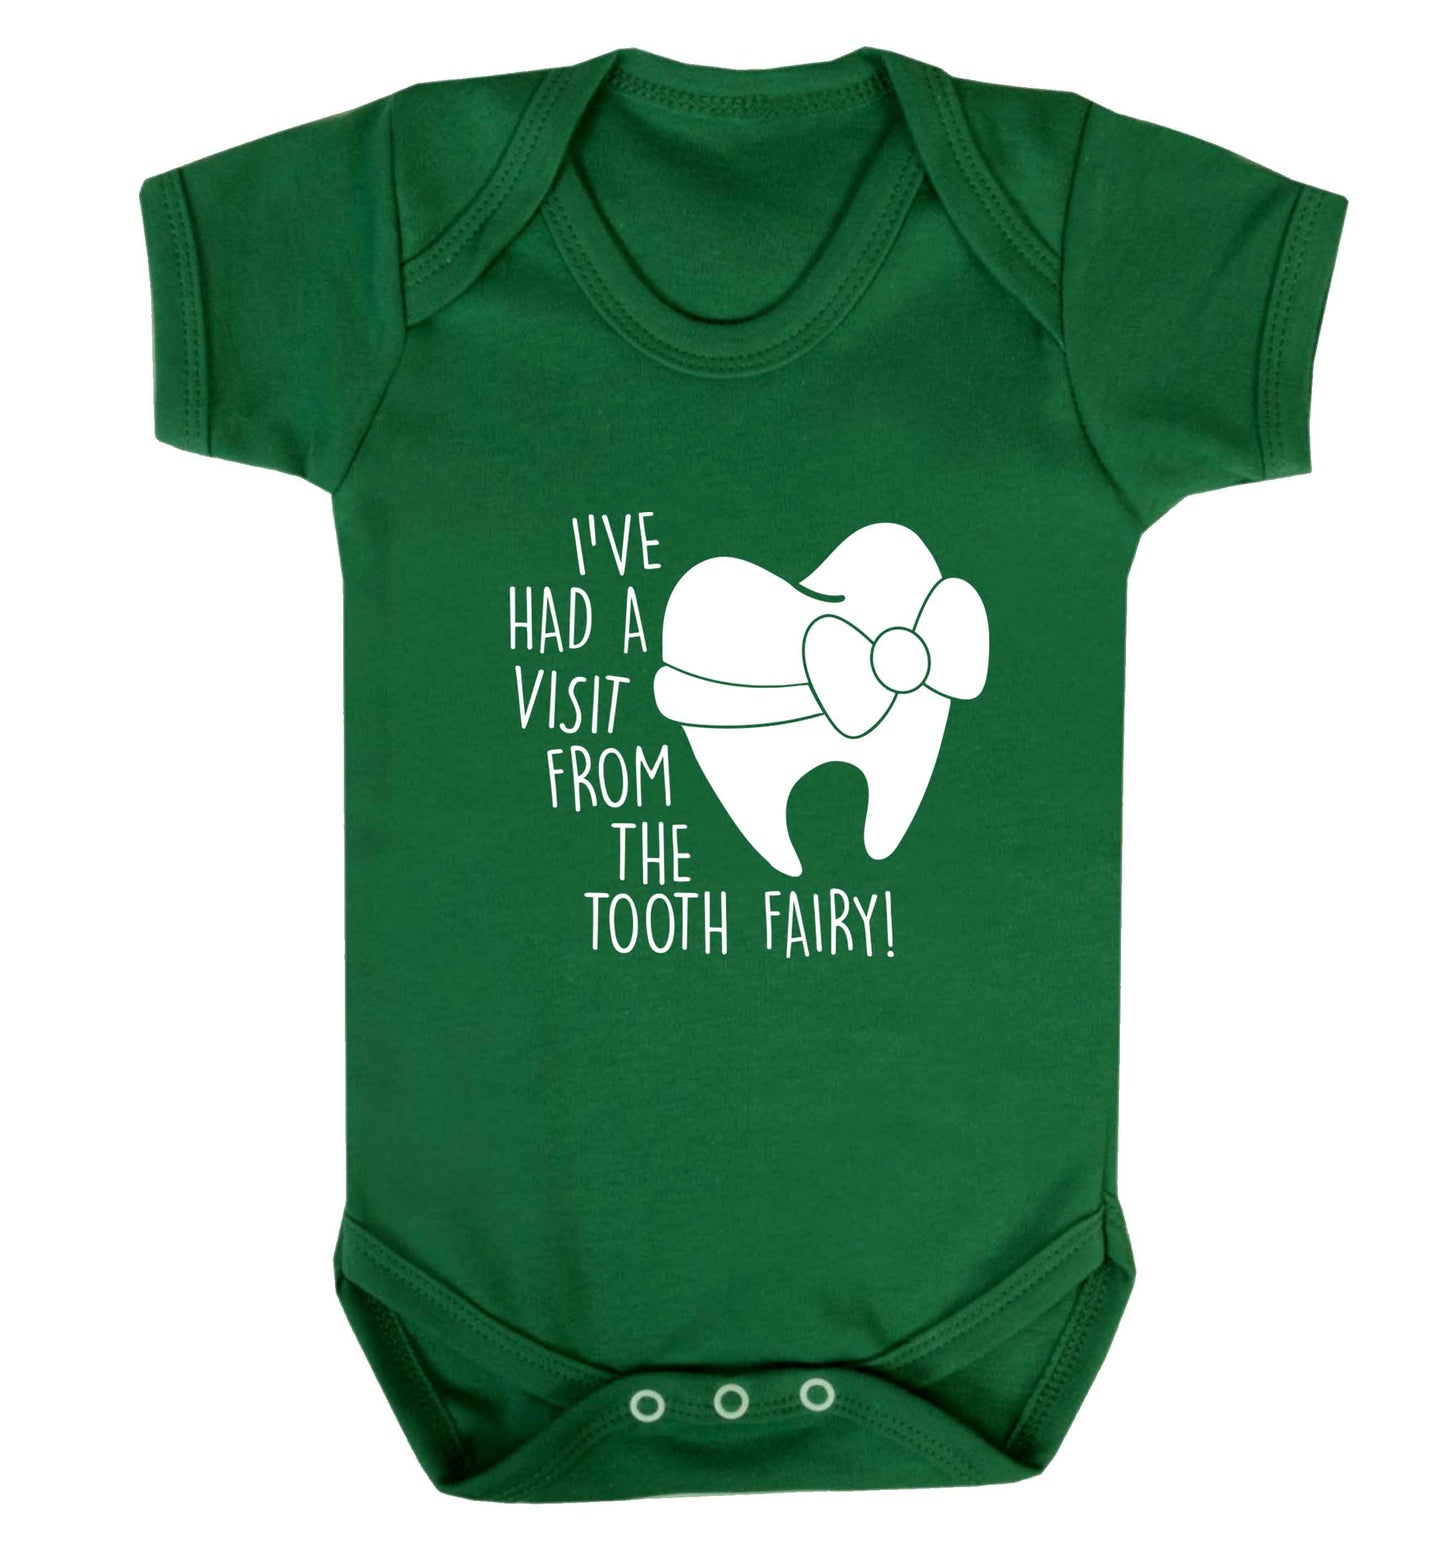 Visit From Tooth Fairy baby vest green 18-24 months